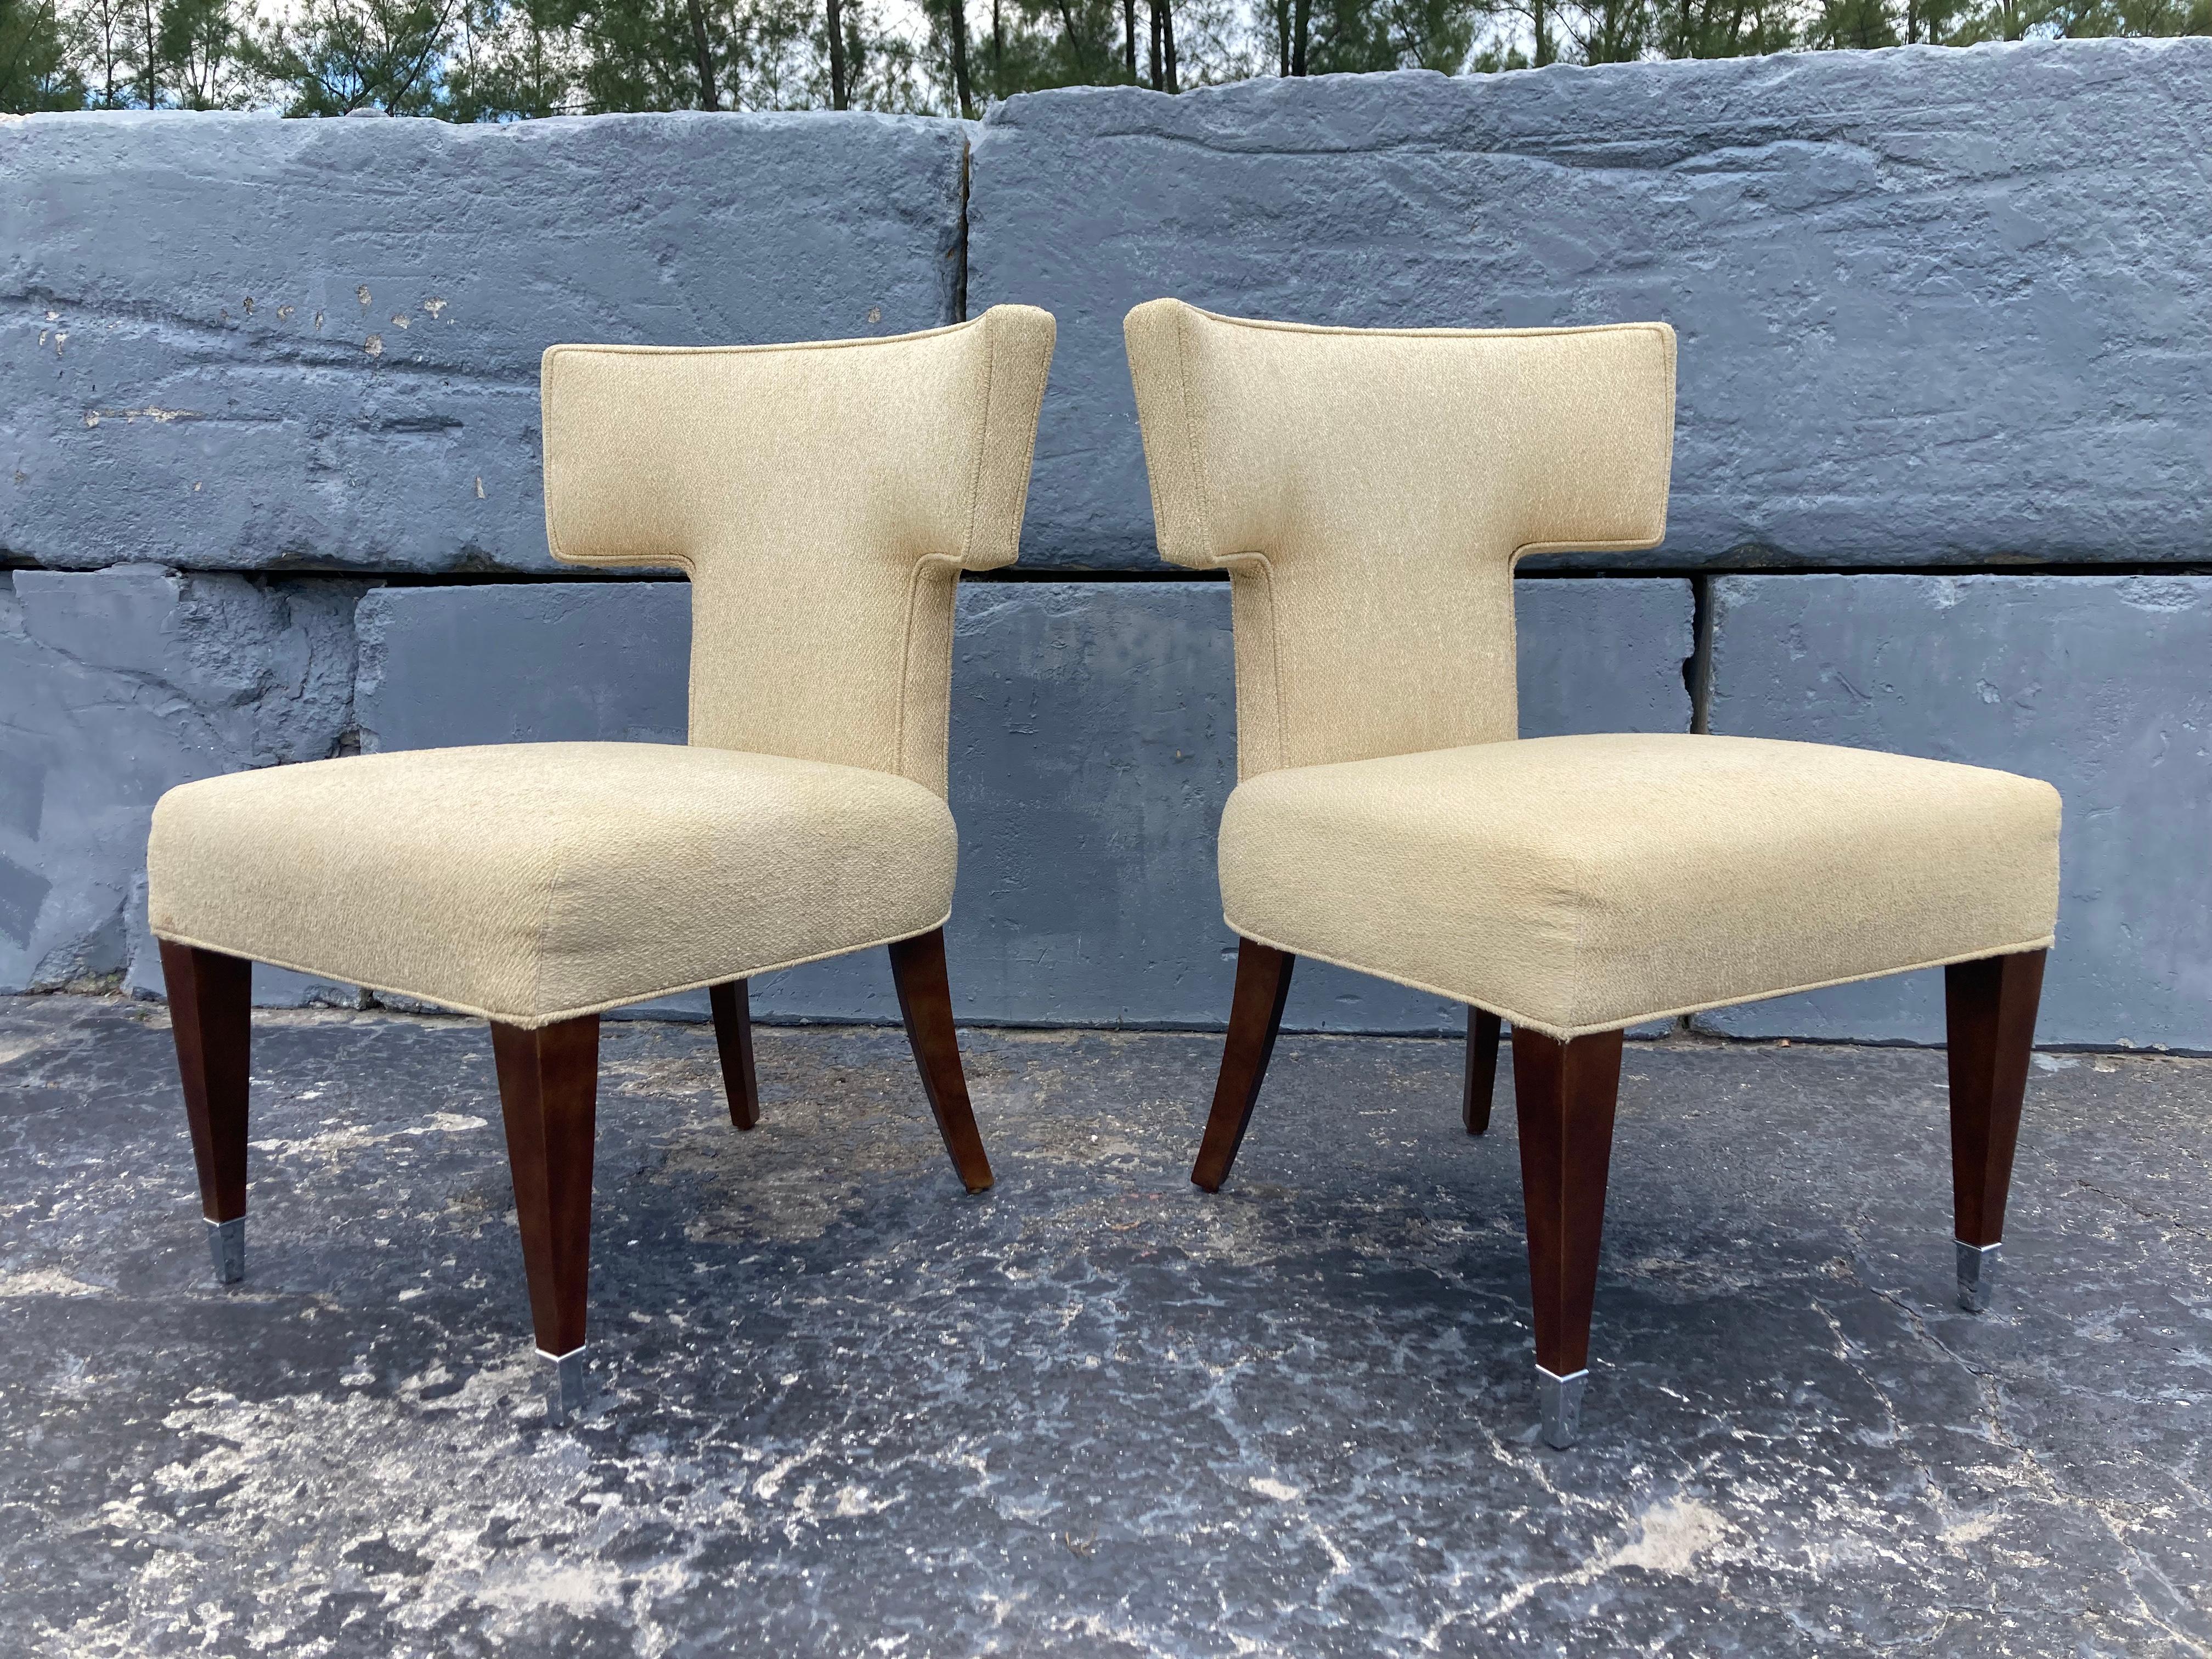 Pair of Chairs Designed by Larry Laslo for Directional, wooden legs have a faux burl wood finish and stainless steel tips. Original fabric is in not perfect condition and has some soiling. We recommend to reupholster the chairs, we can help.